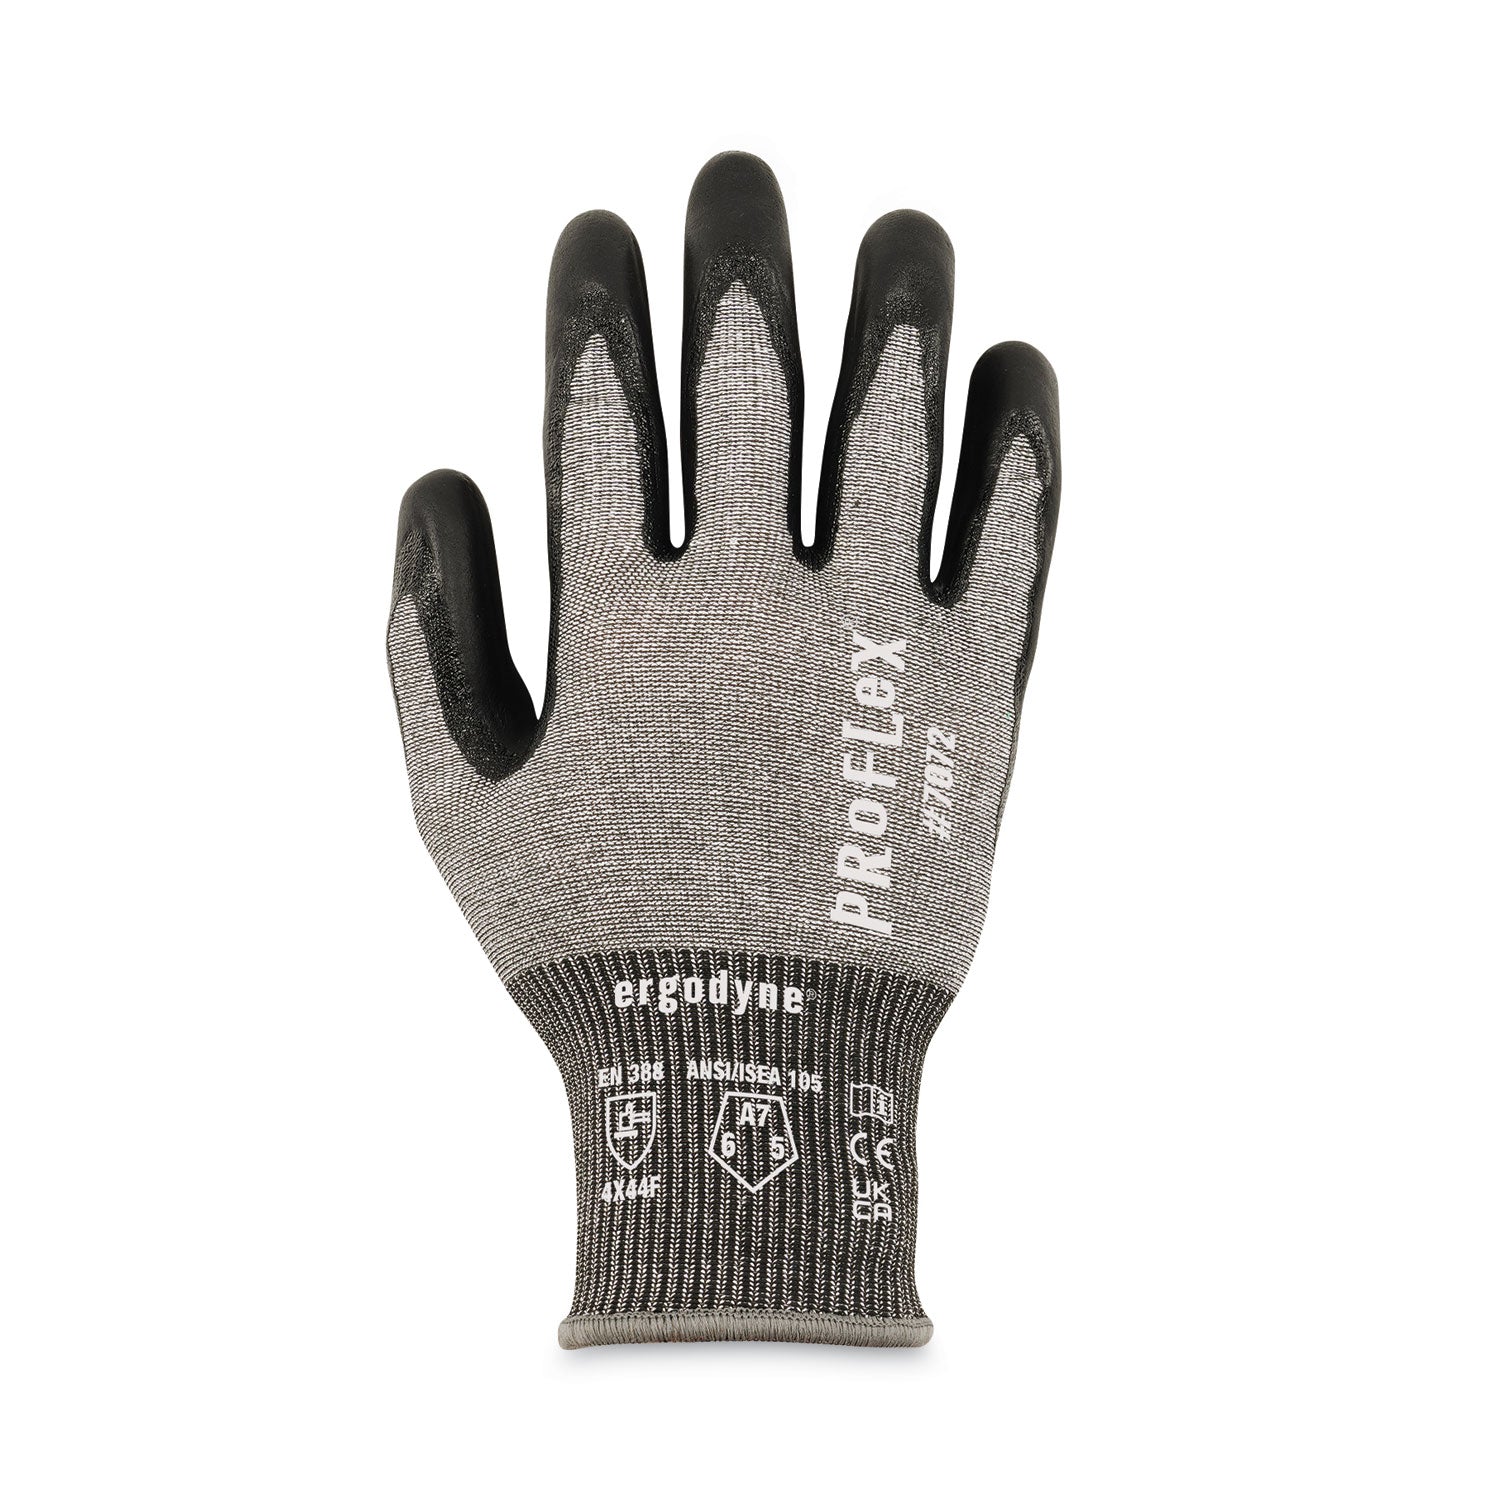 proflex-7072-ansi-a7-nitrile-coated-cr-gloves-gray-small-12-pairs-pack-ships-in-1-3-business-days_ego10302 - 3